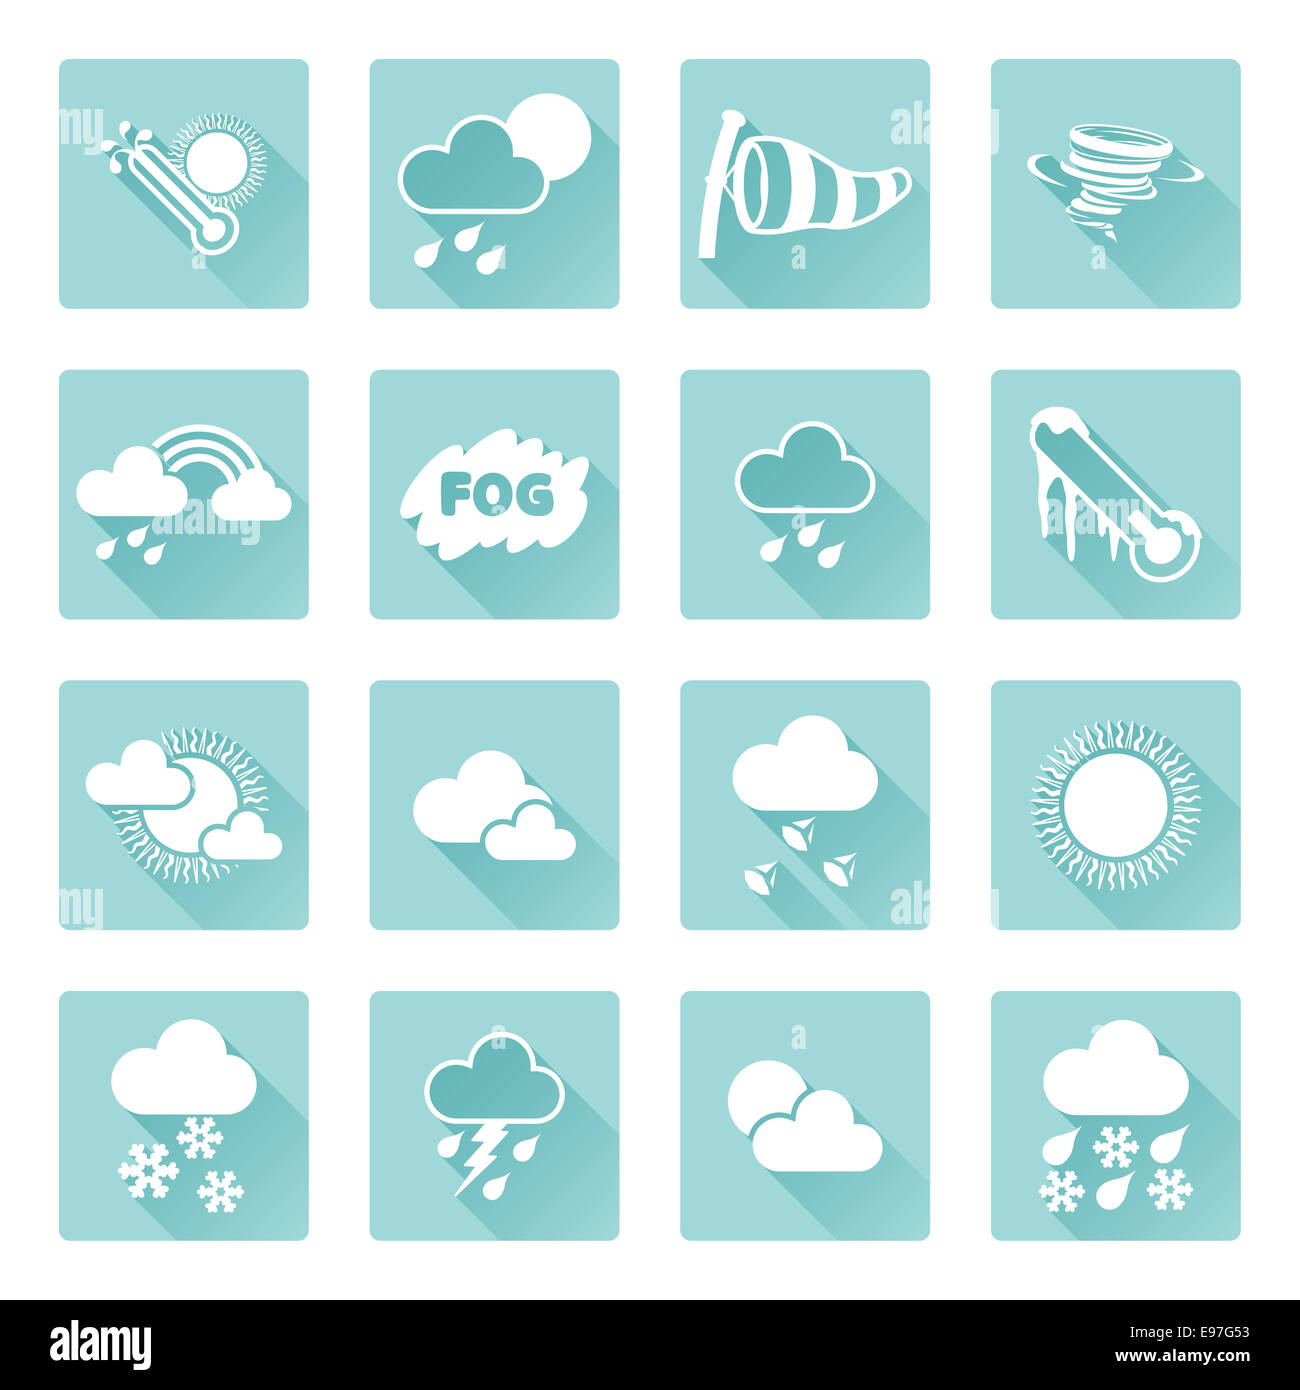 Weather icon set for weather forecasting apps or similar in modern flat shadow style Stock Photo